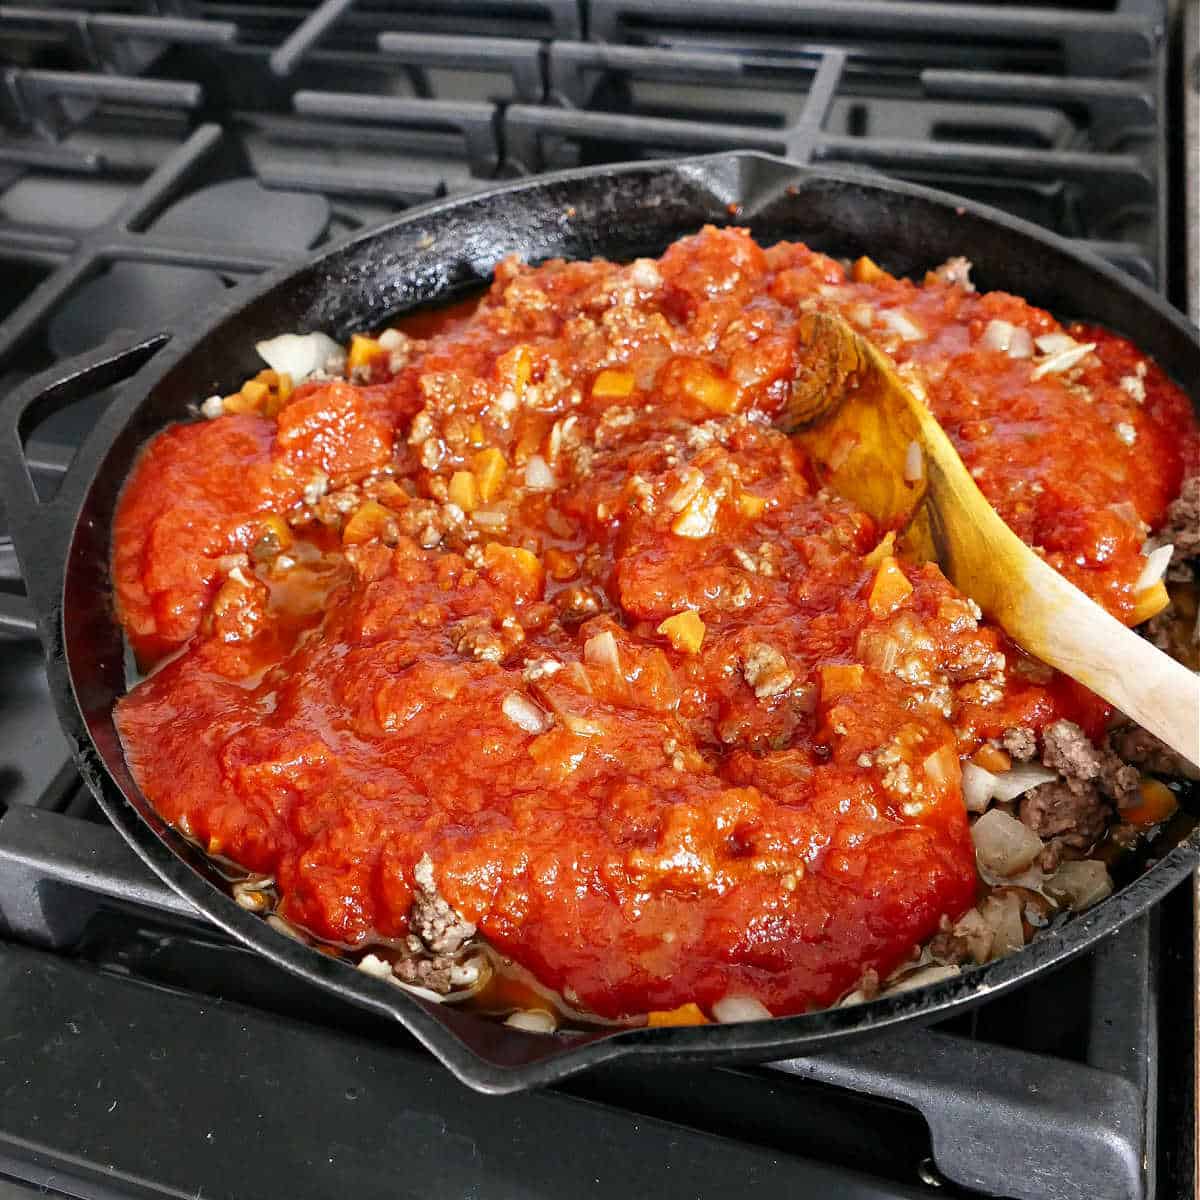 ground meat and vegetables cooking in tomato sauce in a cast iron skillet